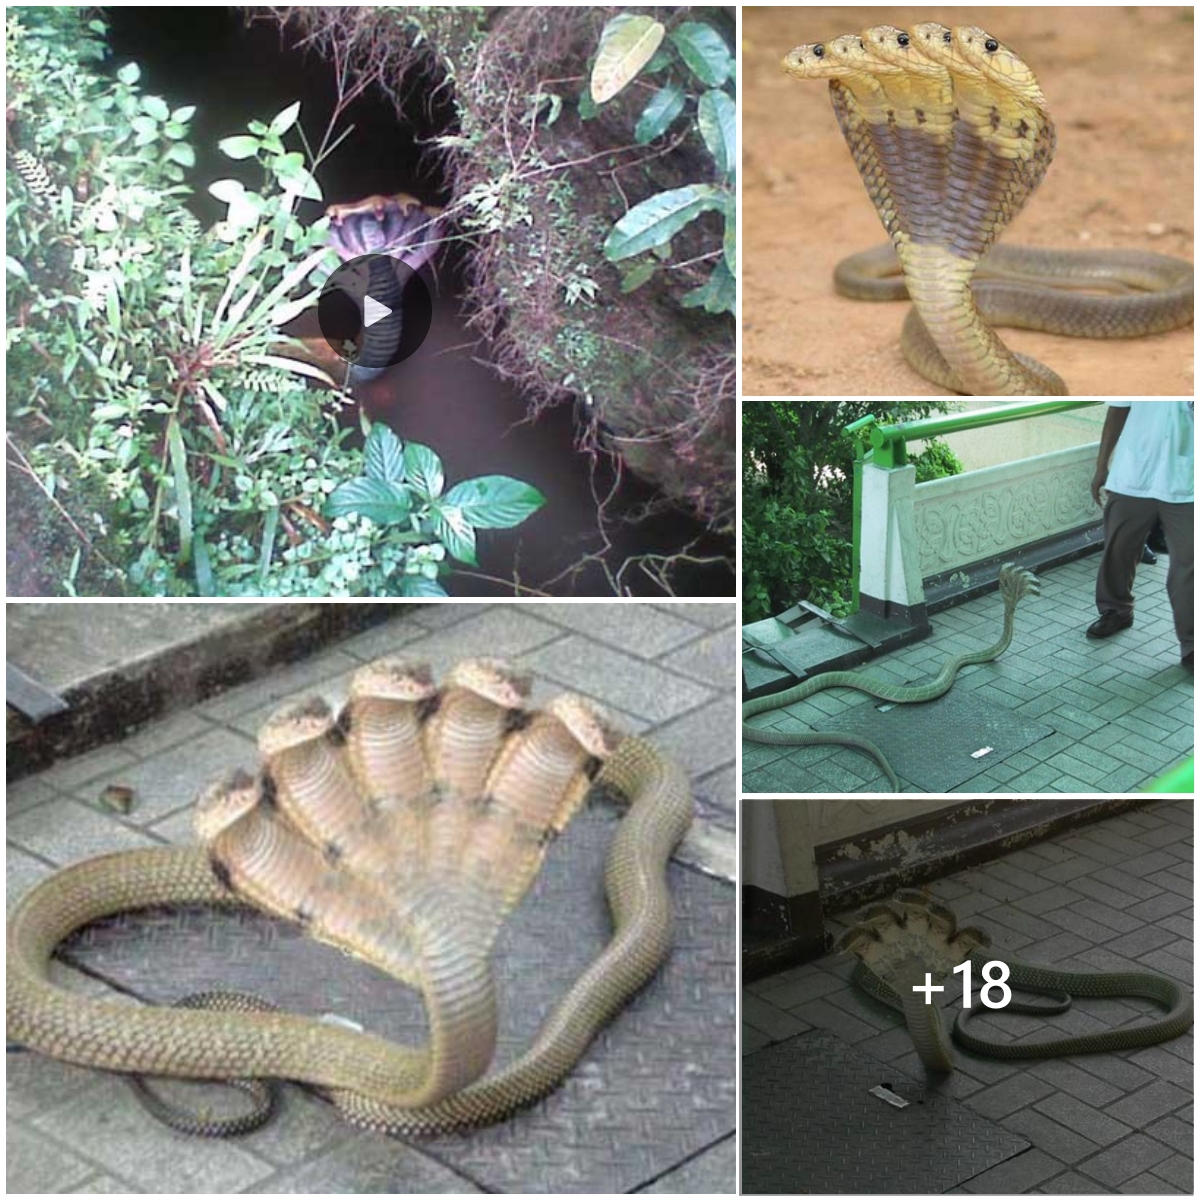 The 5-headed cobra that is said to be sacred appeared in India causing ...